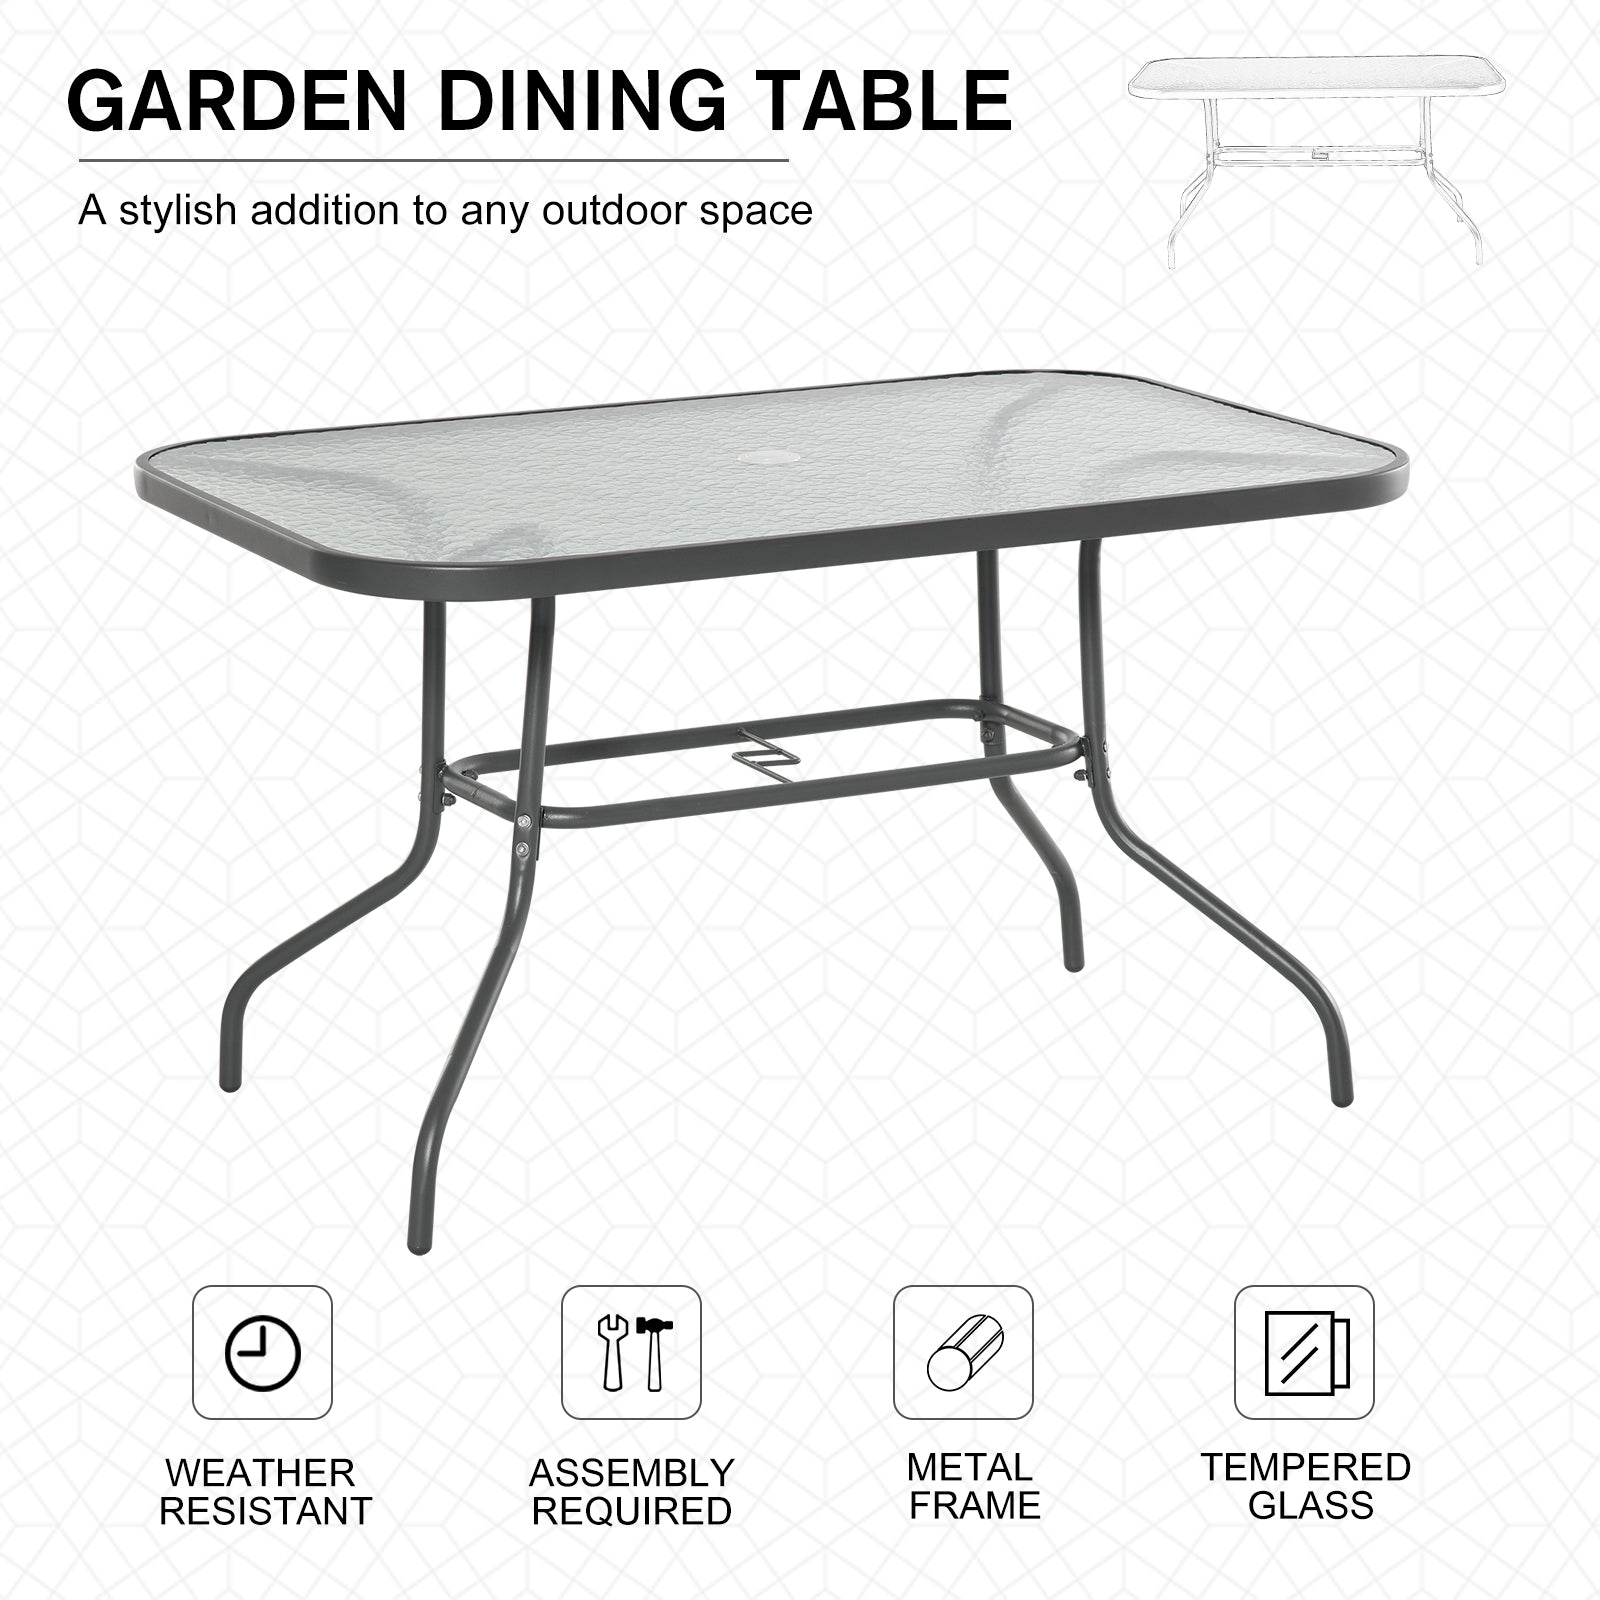 Glass Top Garden Table Curved Metal Frame w/ Parasol Hole 4 Legs Outdoor Balcony Sturdy Friends Family Dining Table -Grey-3